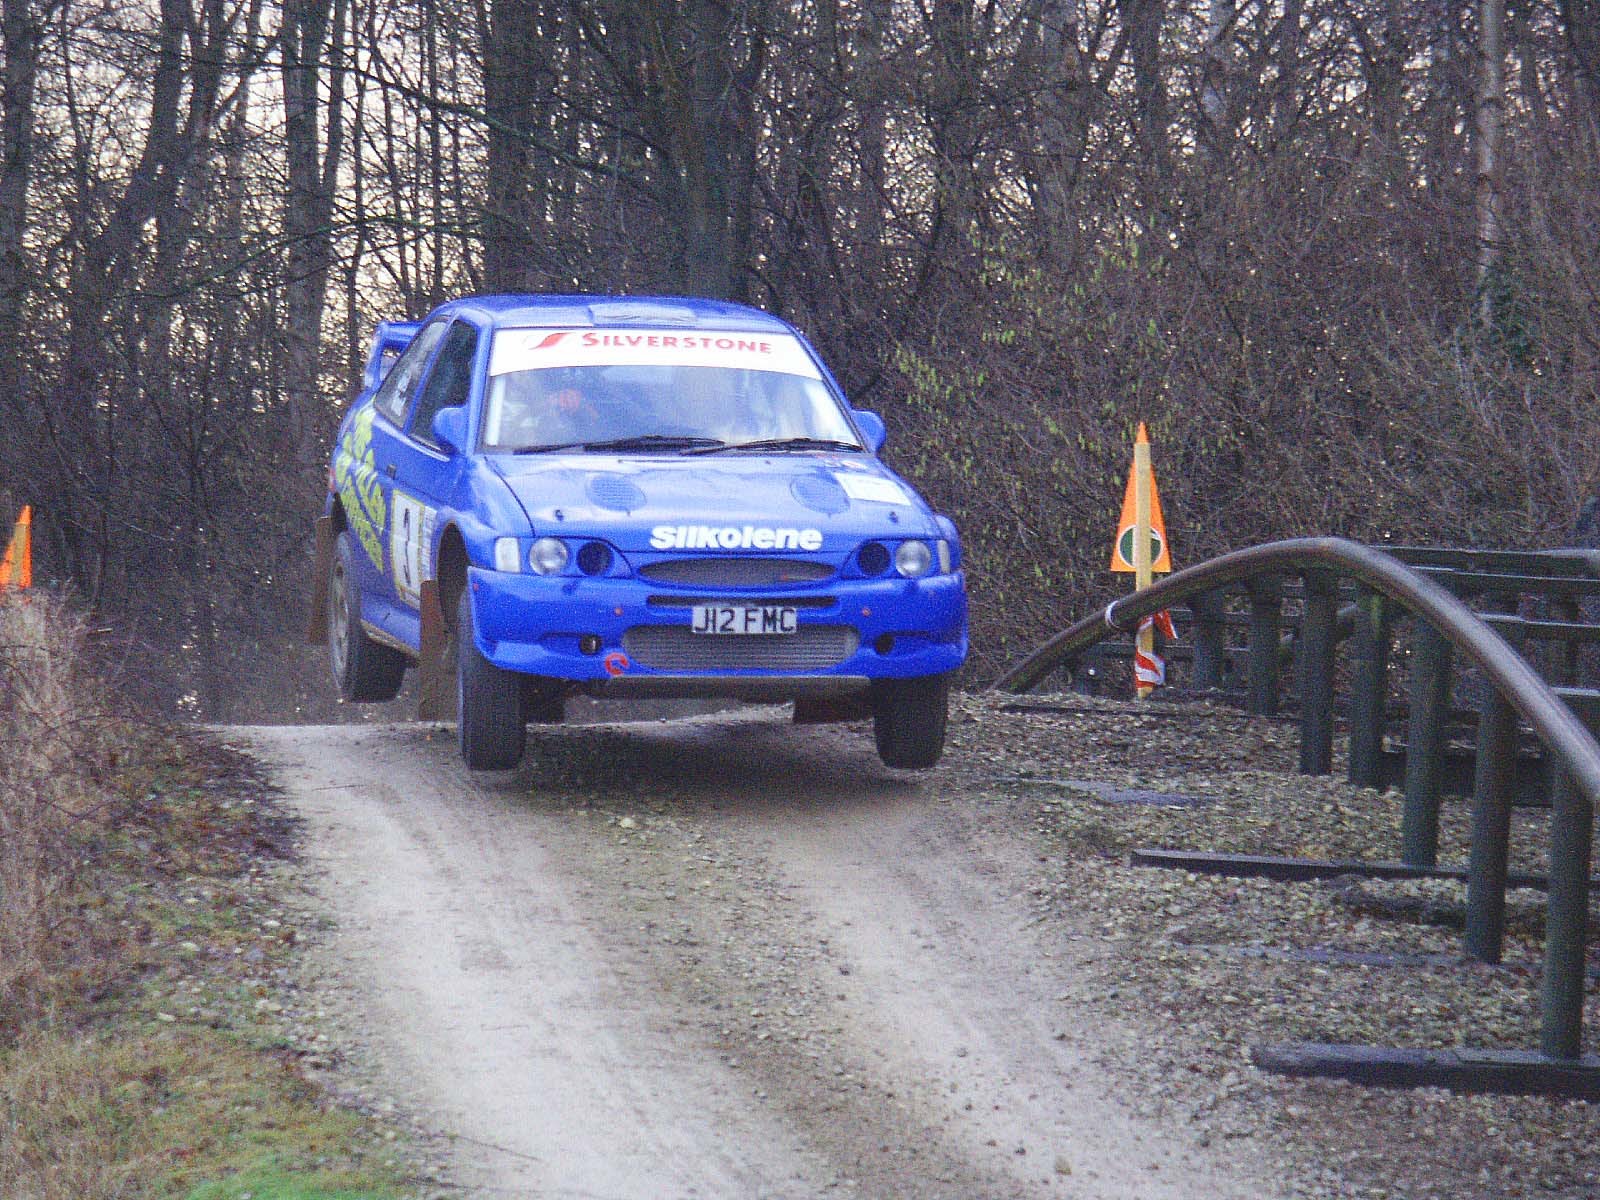 Ian Joel demonstrates the precarious proximity of the rally route to &lsquo;The Ultimate Picture: ANDY ELLIS